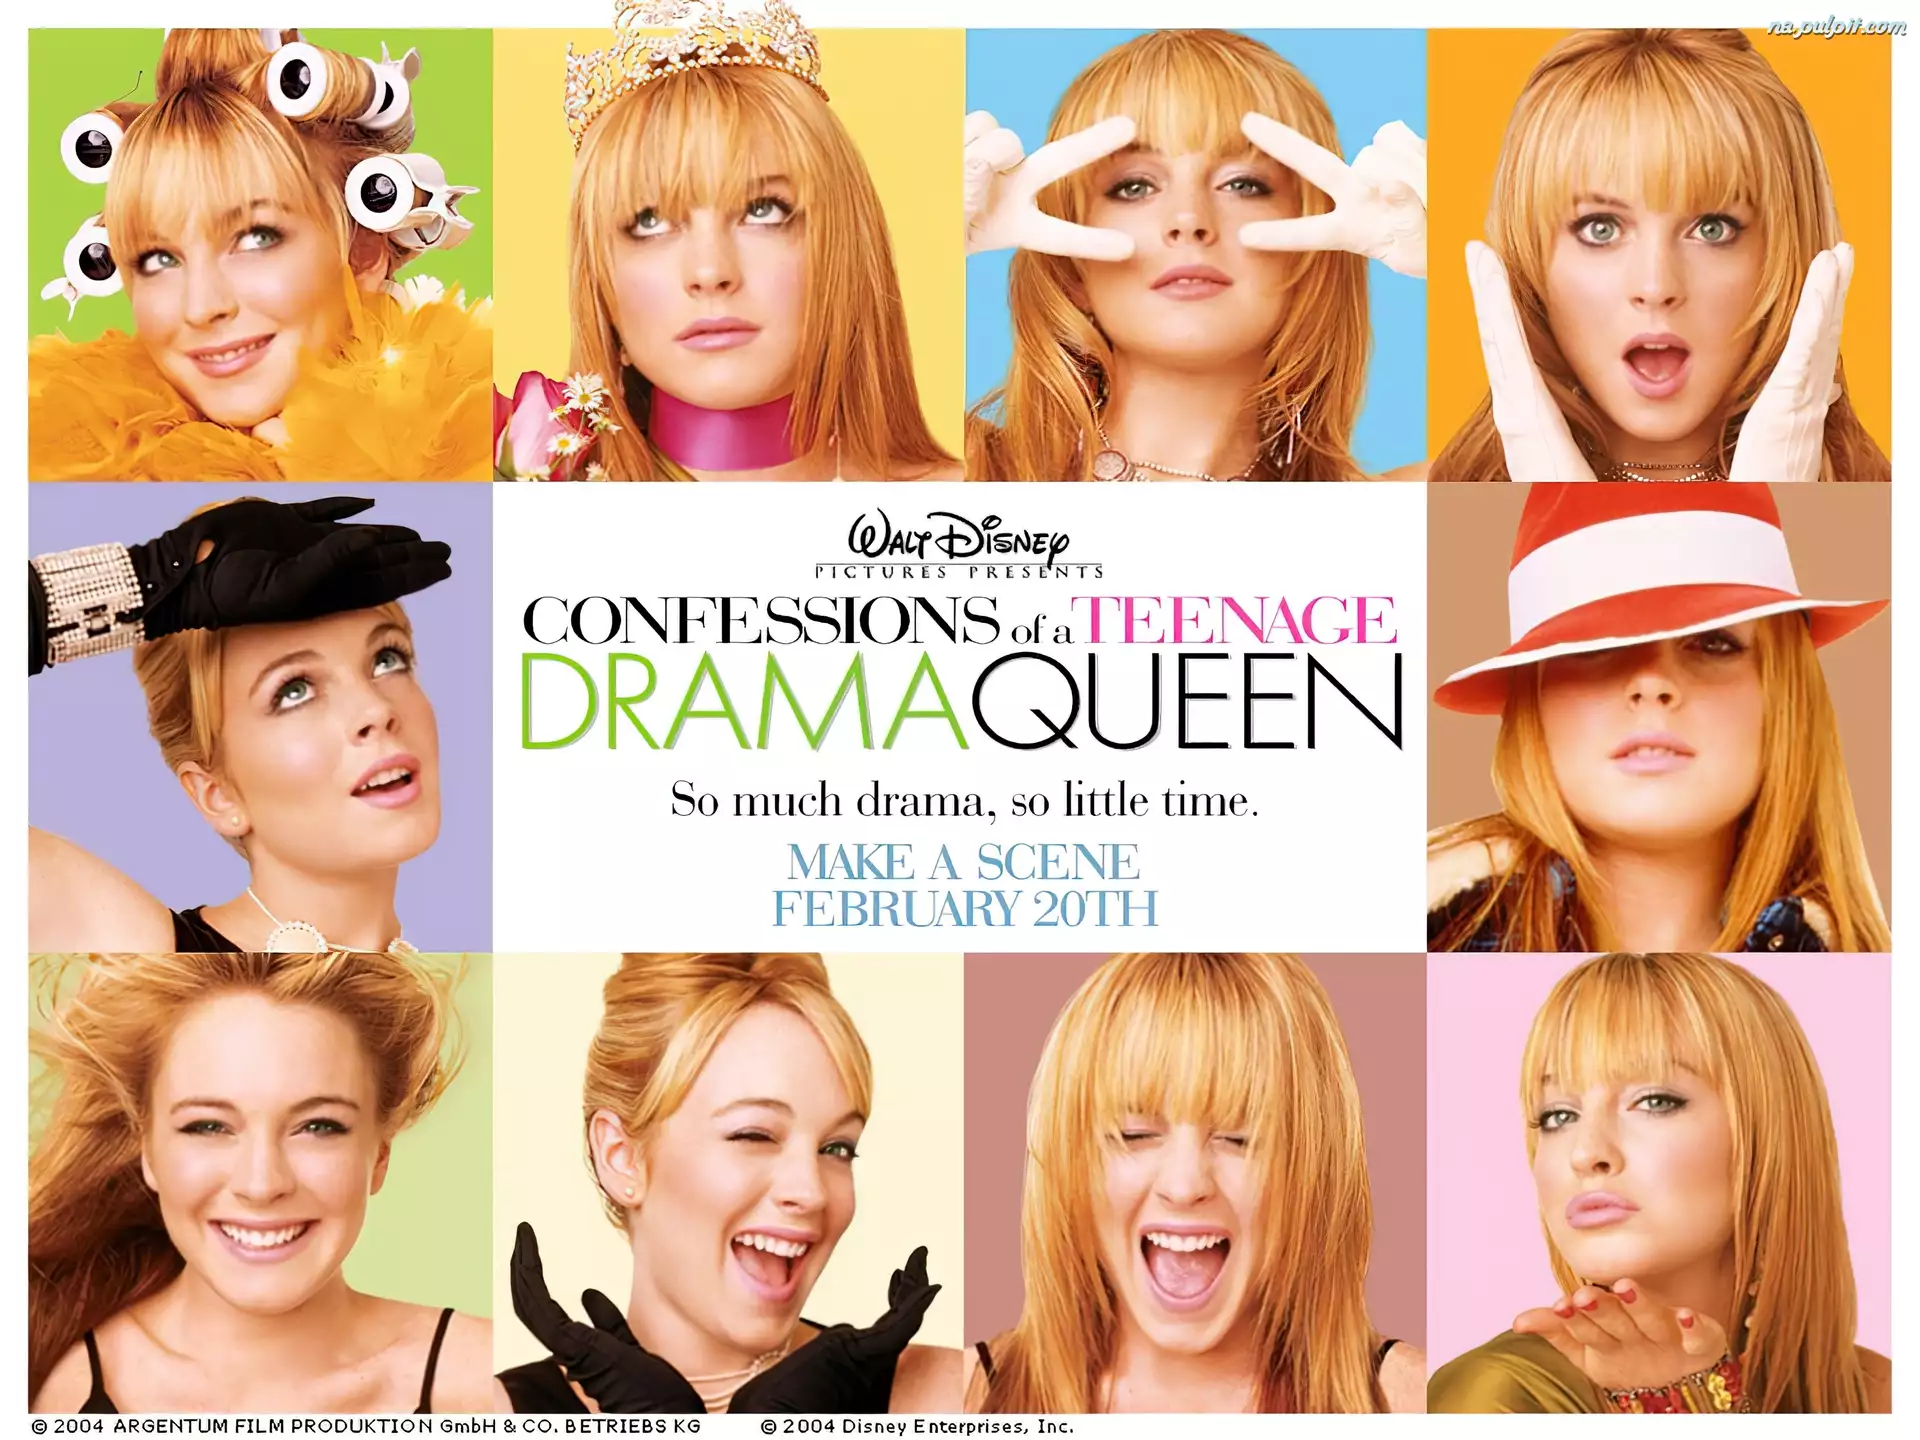 Lindsay Lohan, Confessions Of A Teenage Drama Queen